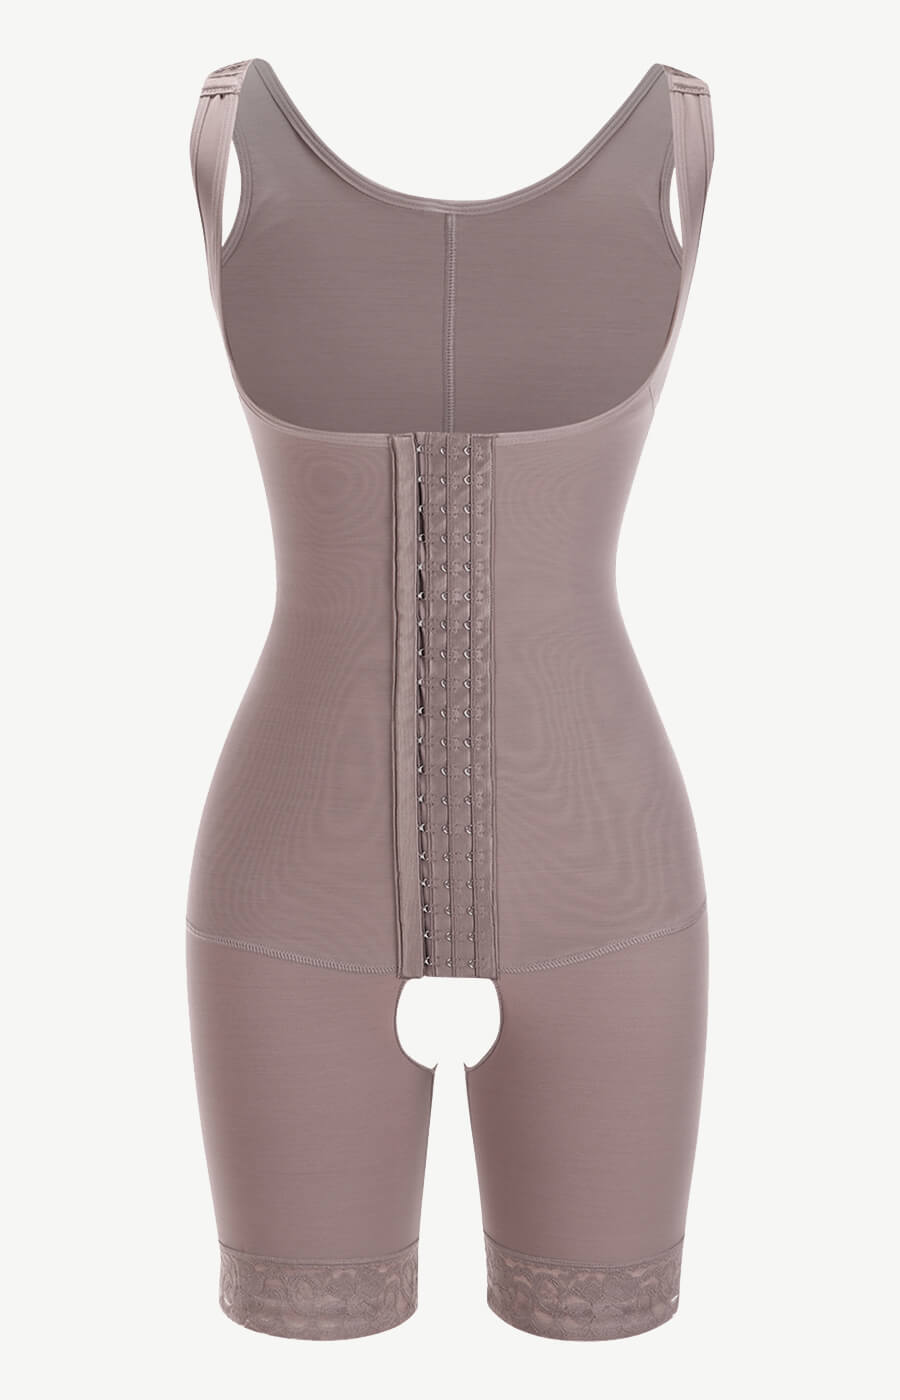 OPEN BUST MID THIGH POSTPARTUM COMPRESSION SHAPEWEAR GIRDLE AFTER